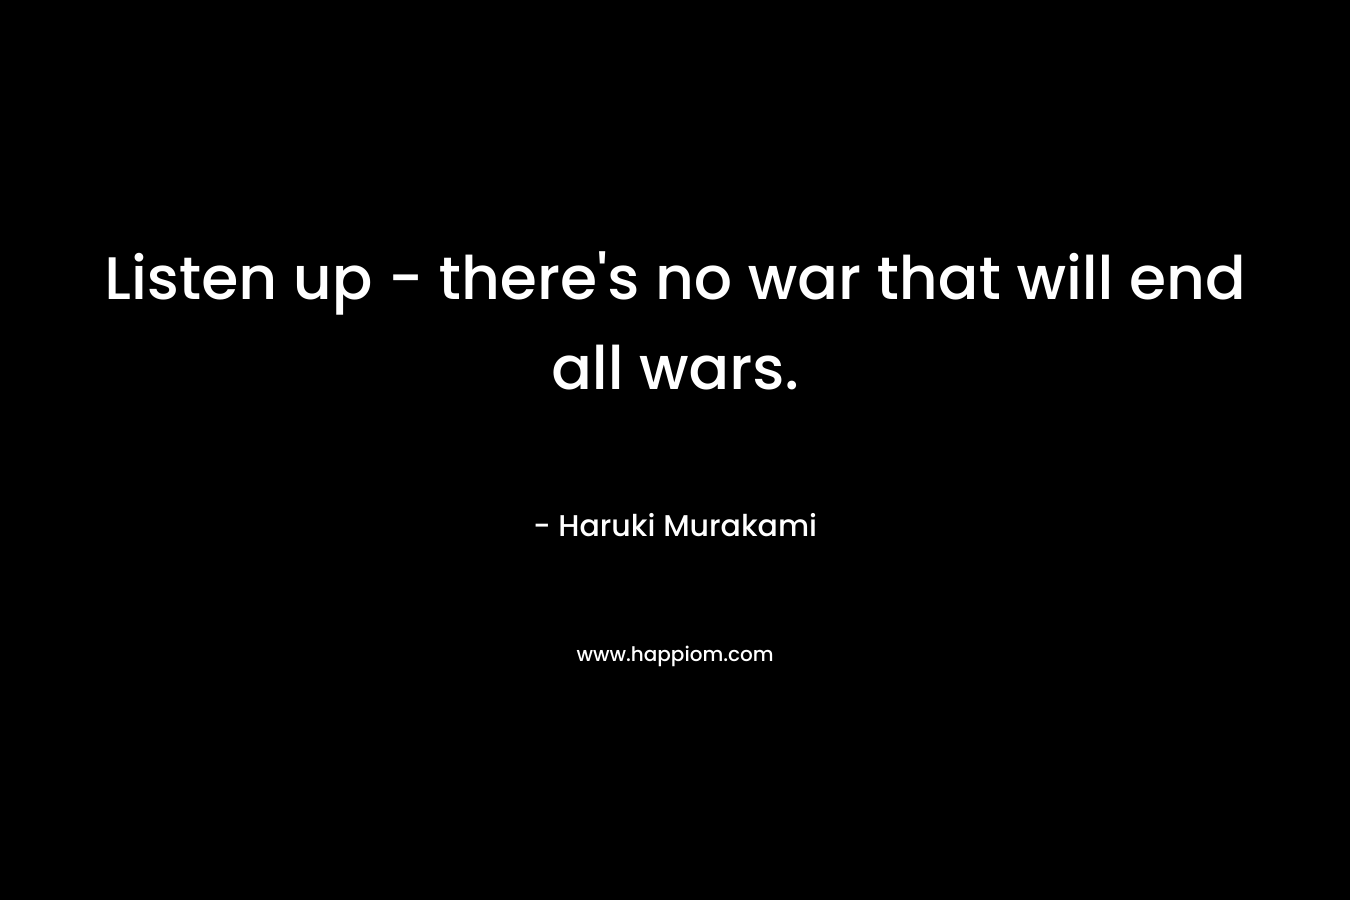 Listen up - there's no war that will end all wars.